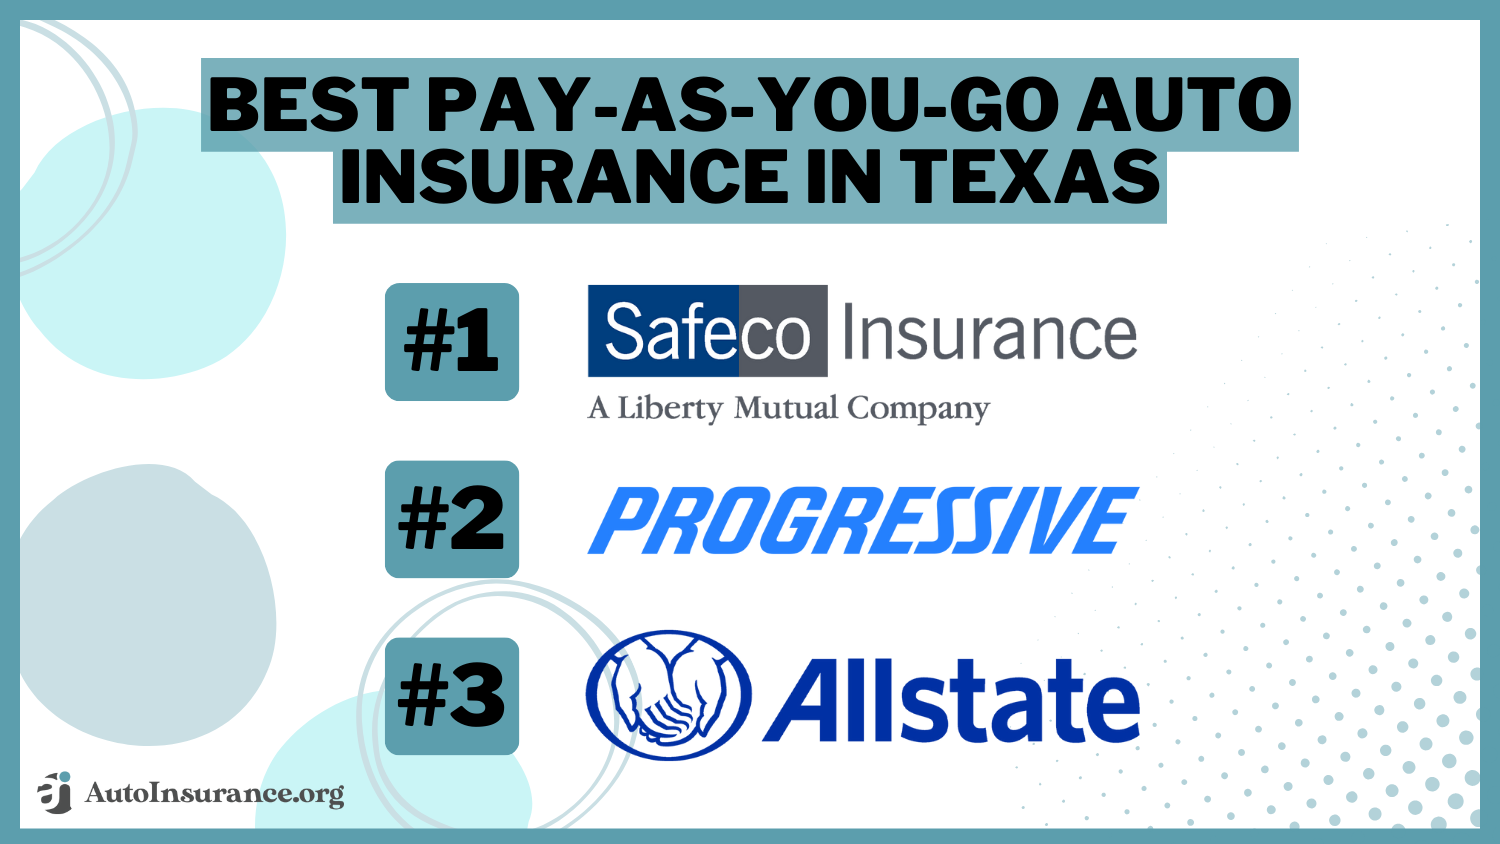 Best Pay-As-You-Go Auto Insurance in Texas: Safeco, Progressive, Allstate